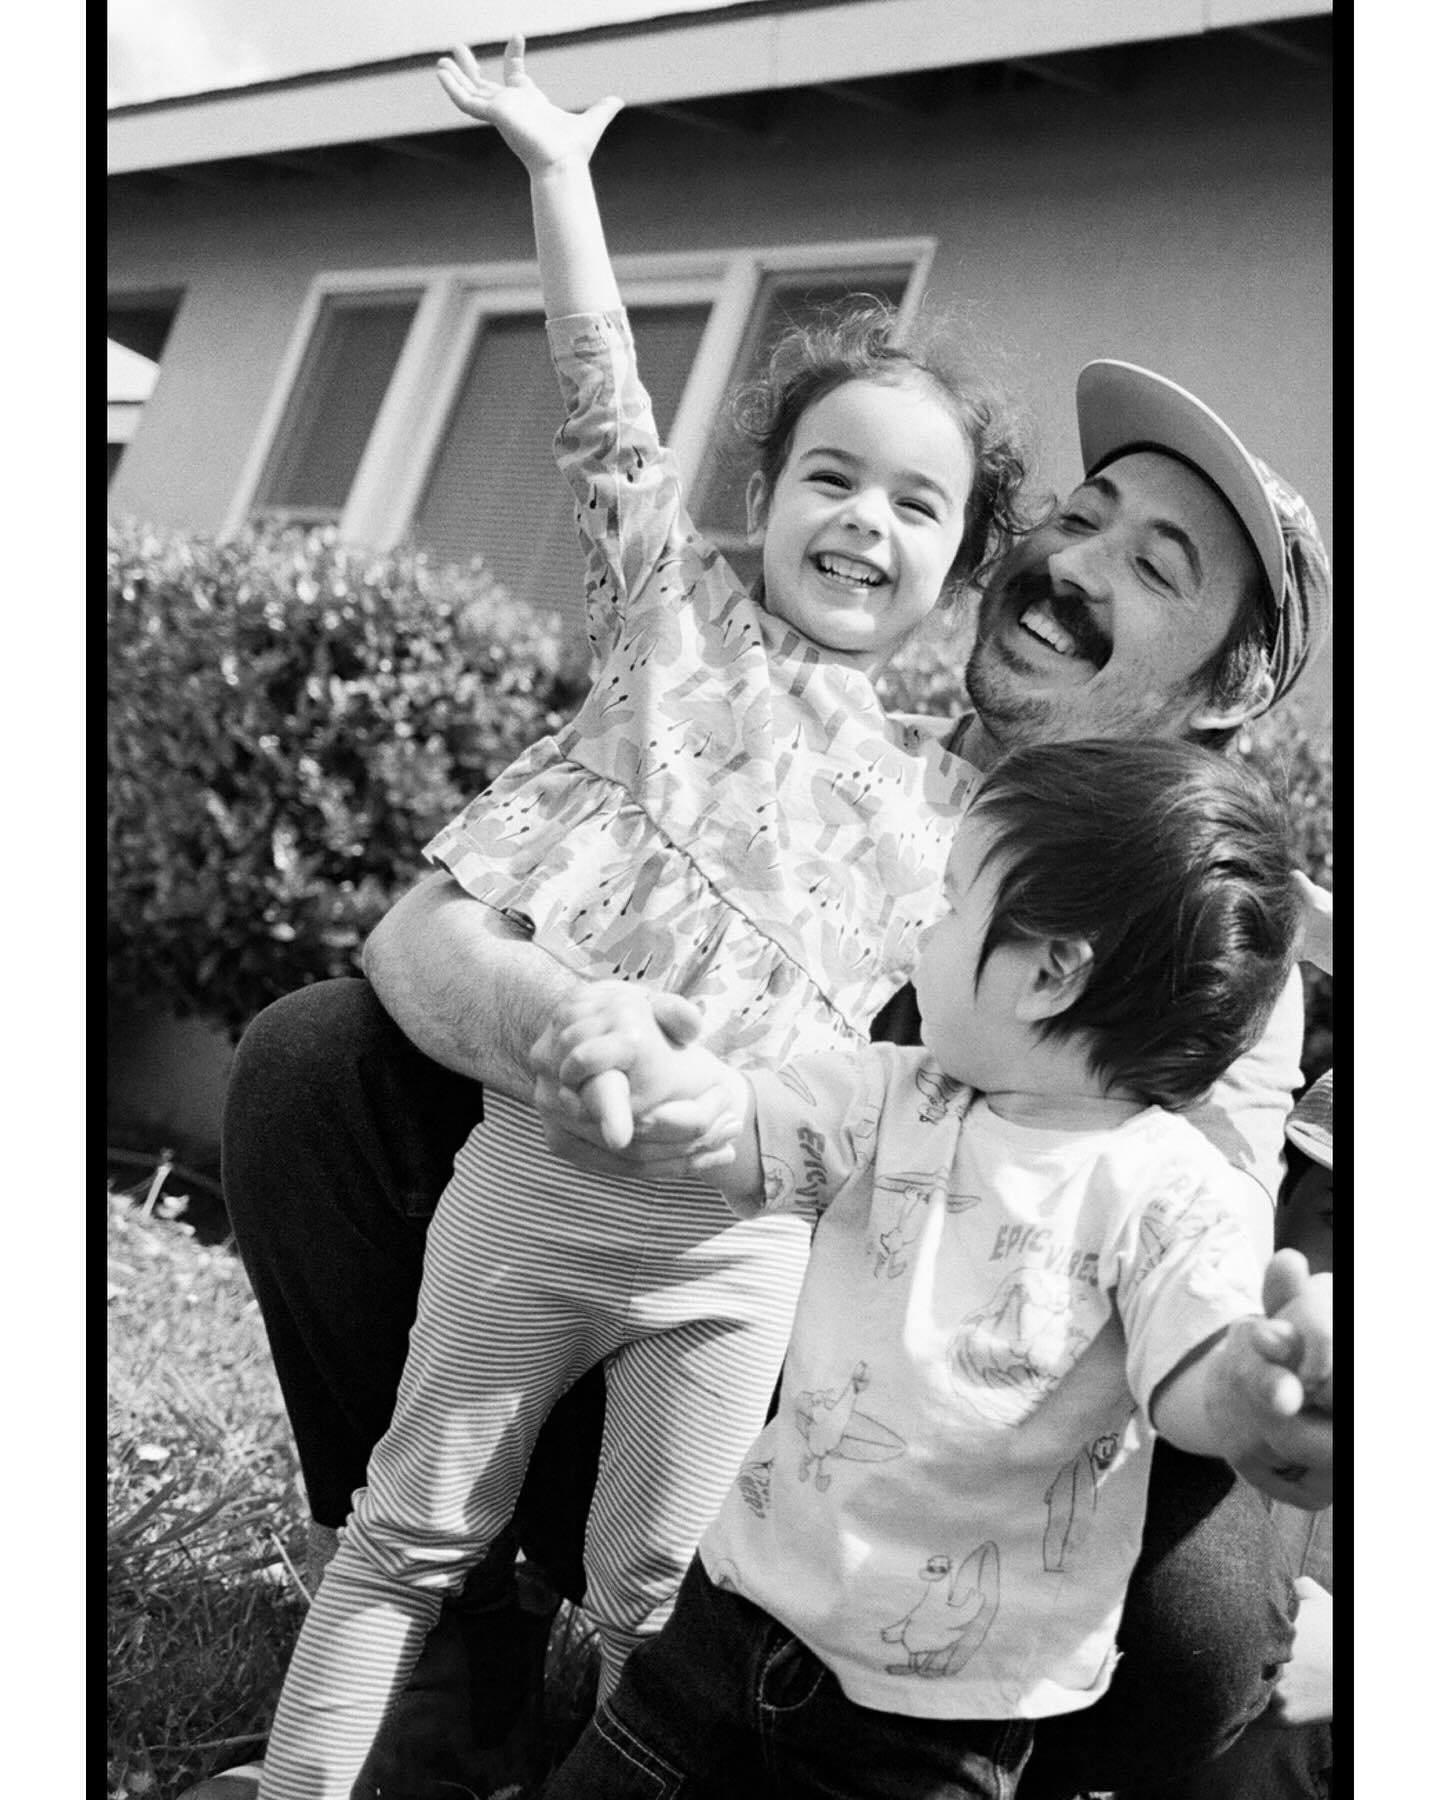 lil imperfect film photos of this fam of mine. lucie often the star of the show, ollie being a classic baby, kai running from the camera and jumping around as often as he can. andrew and i trying to stay still while kai takes a photo with my film cam